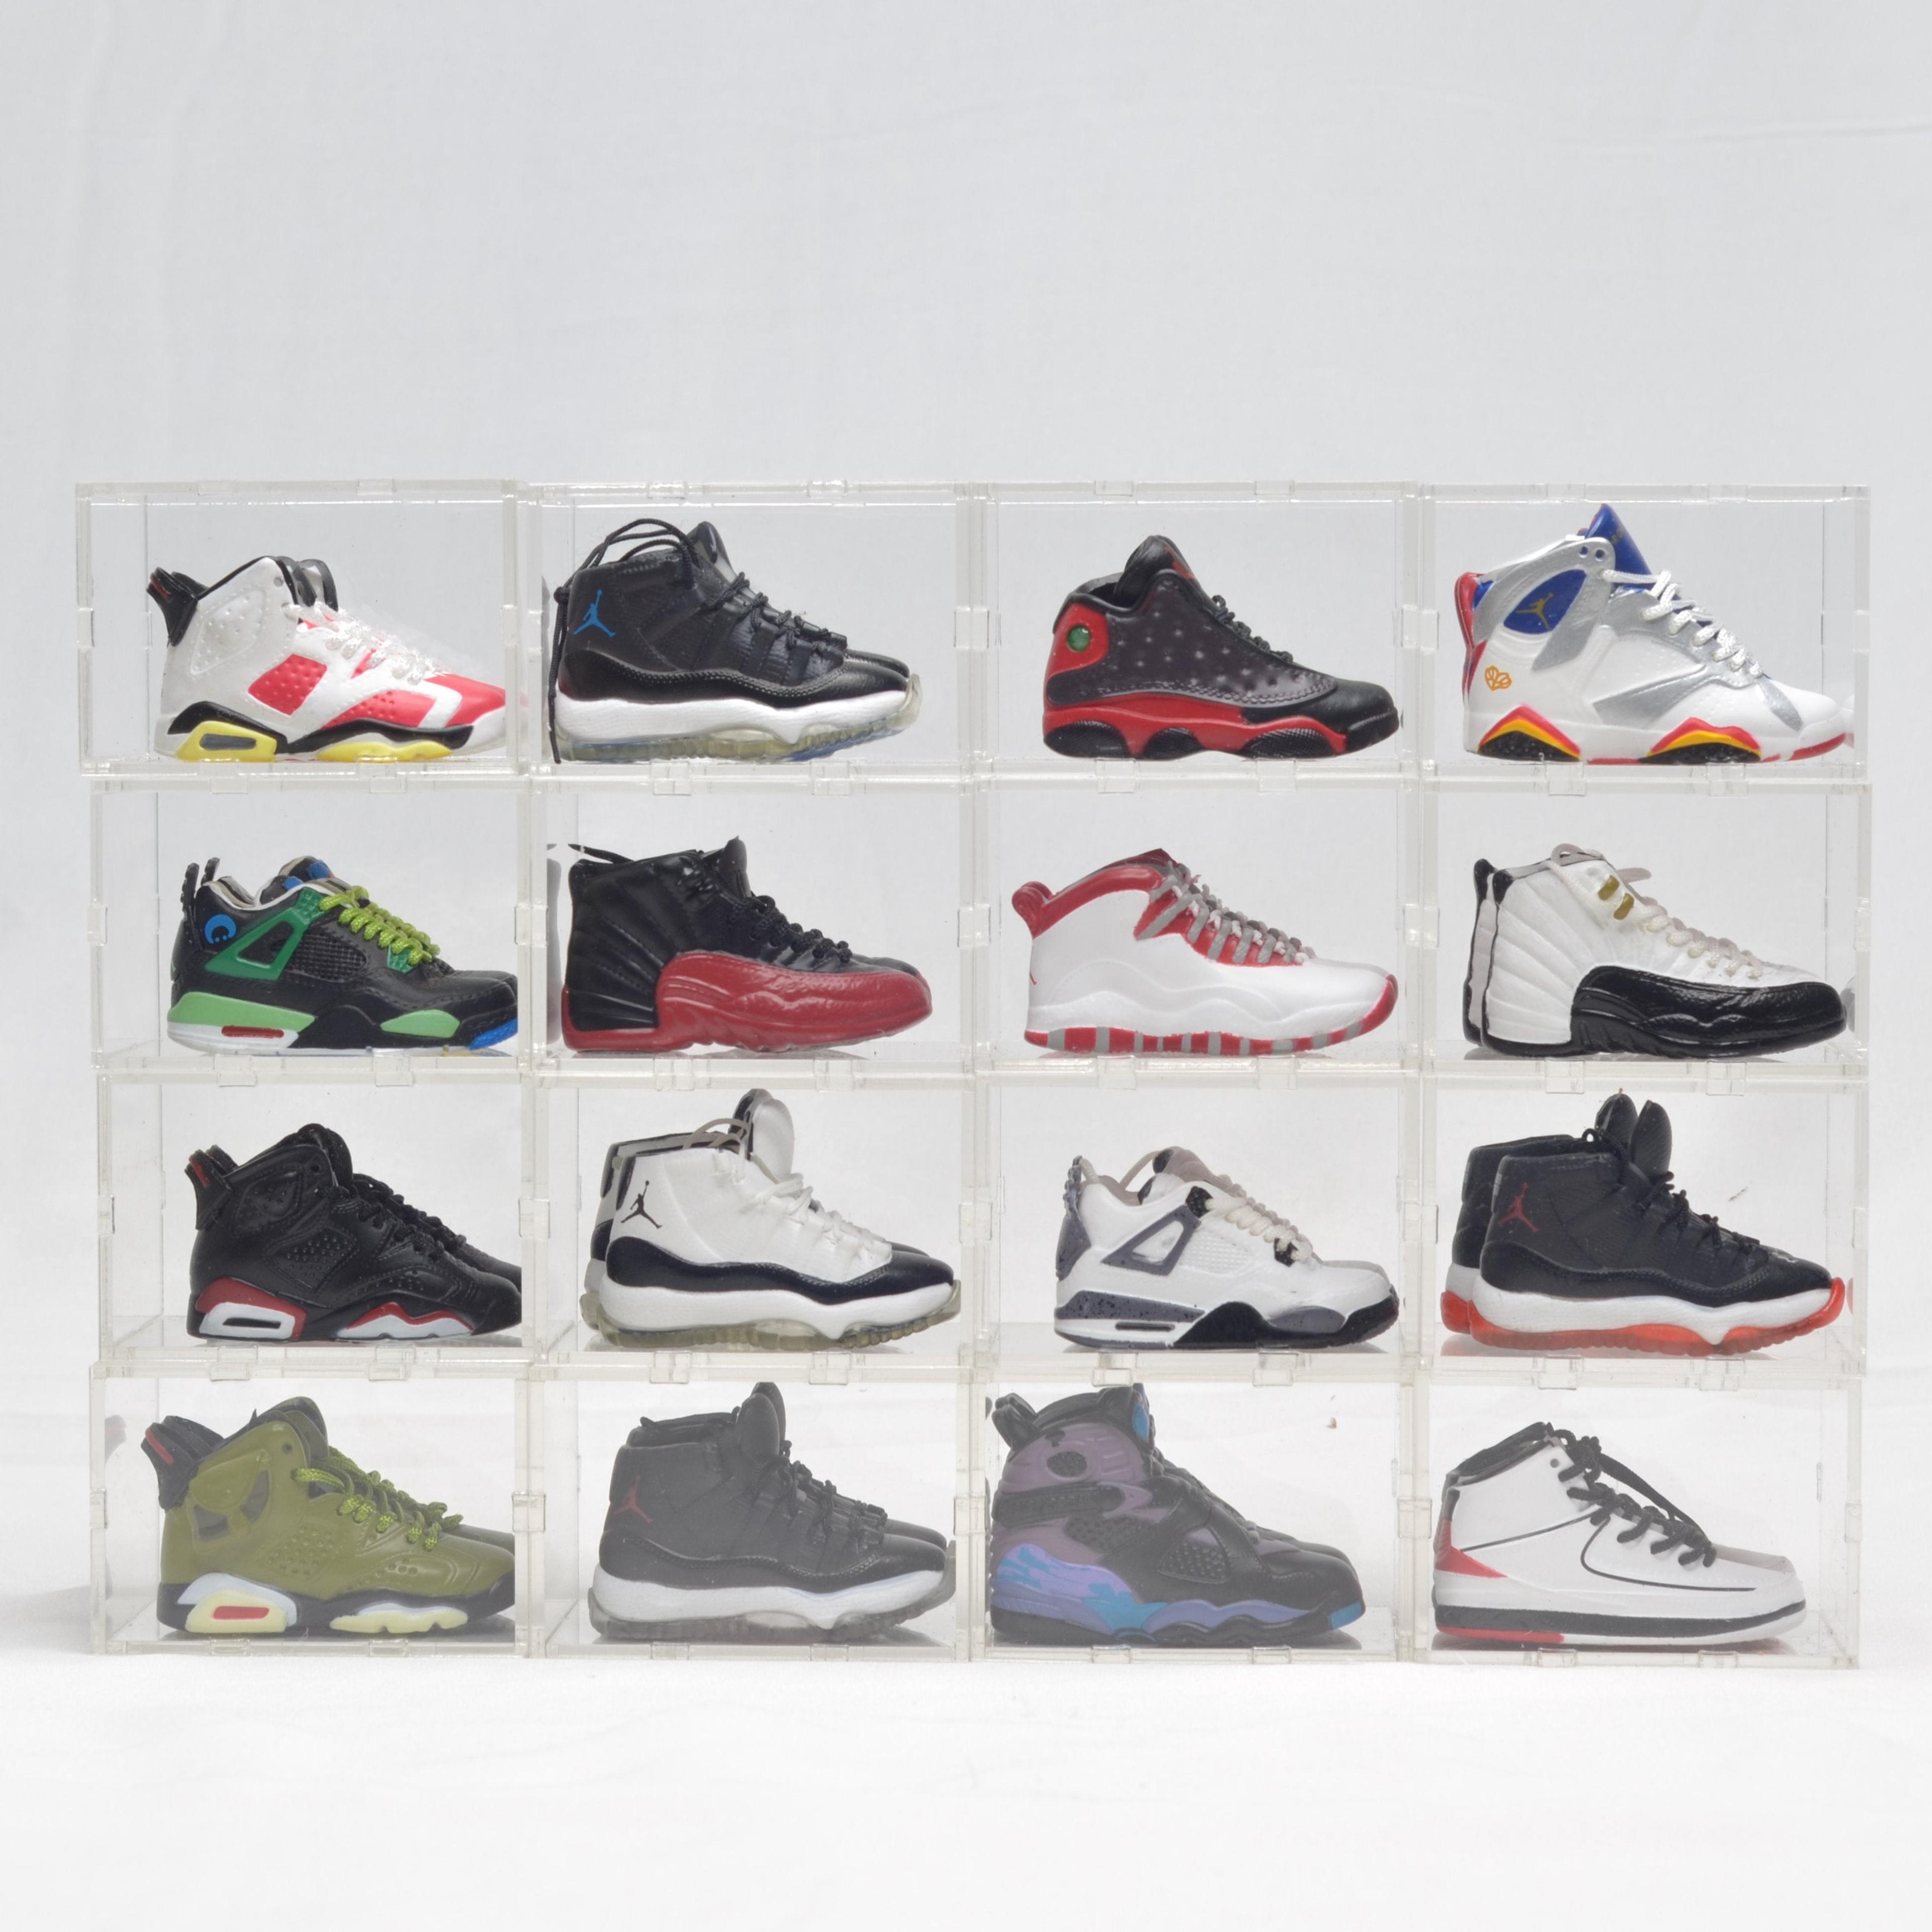 Alternate View 7 of AJ2-AJ13 Mini Sneakers Collection with Display Case